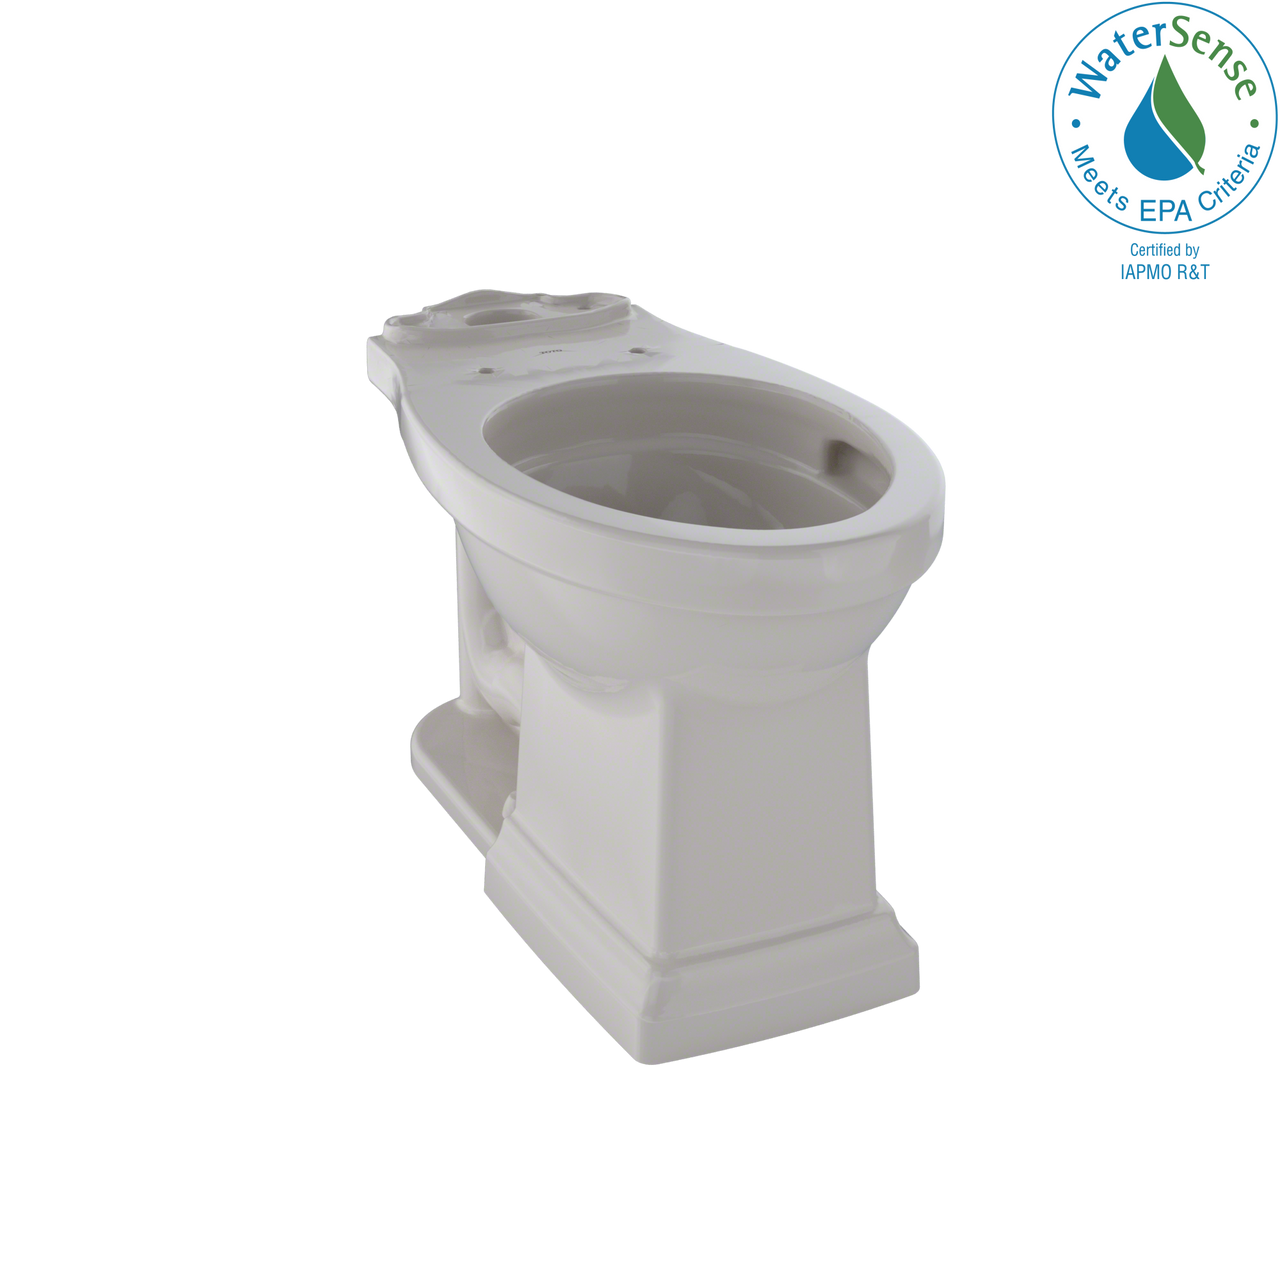 TOTO Promenade II Universal Height Toilet Bowl with CeFiONtect,  - C404CUFG#12 - BNGBath